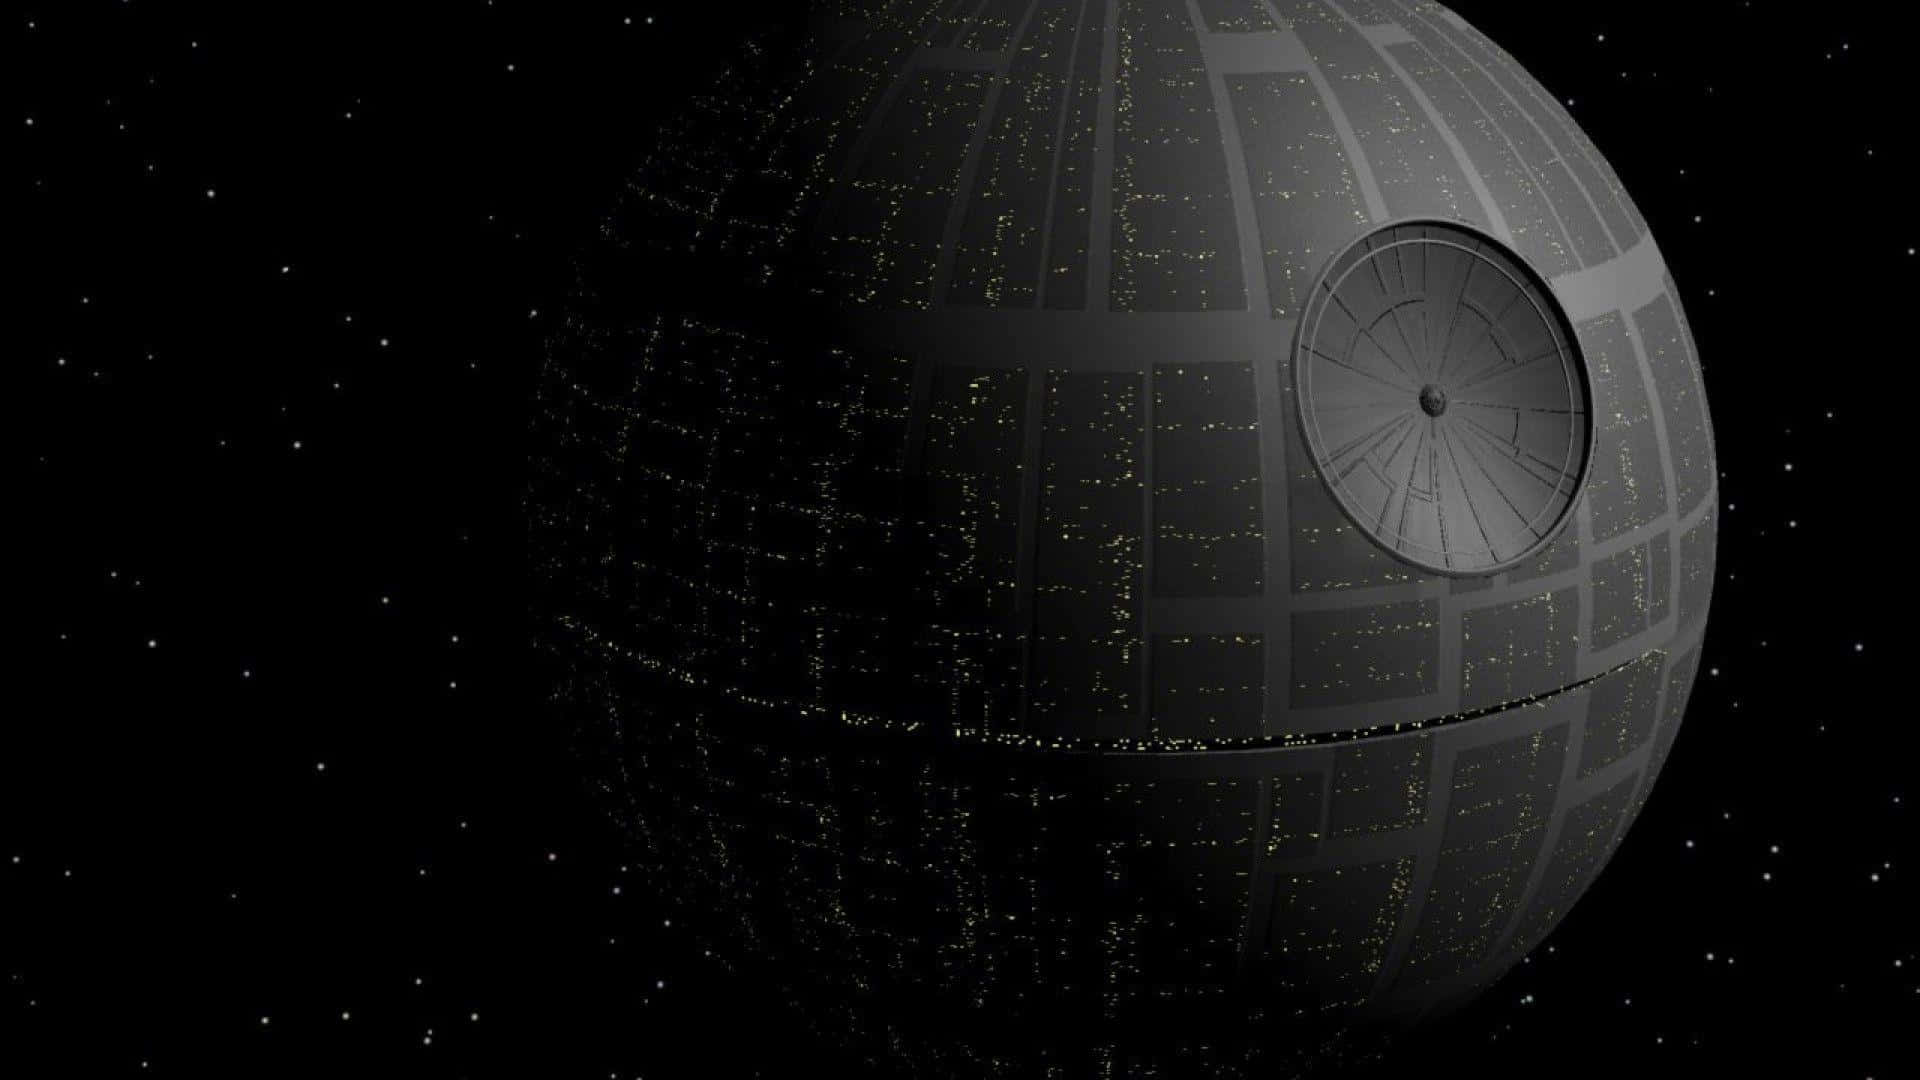 Firepower at its Finest - The Masterful Death Star